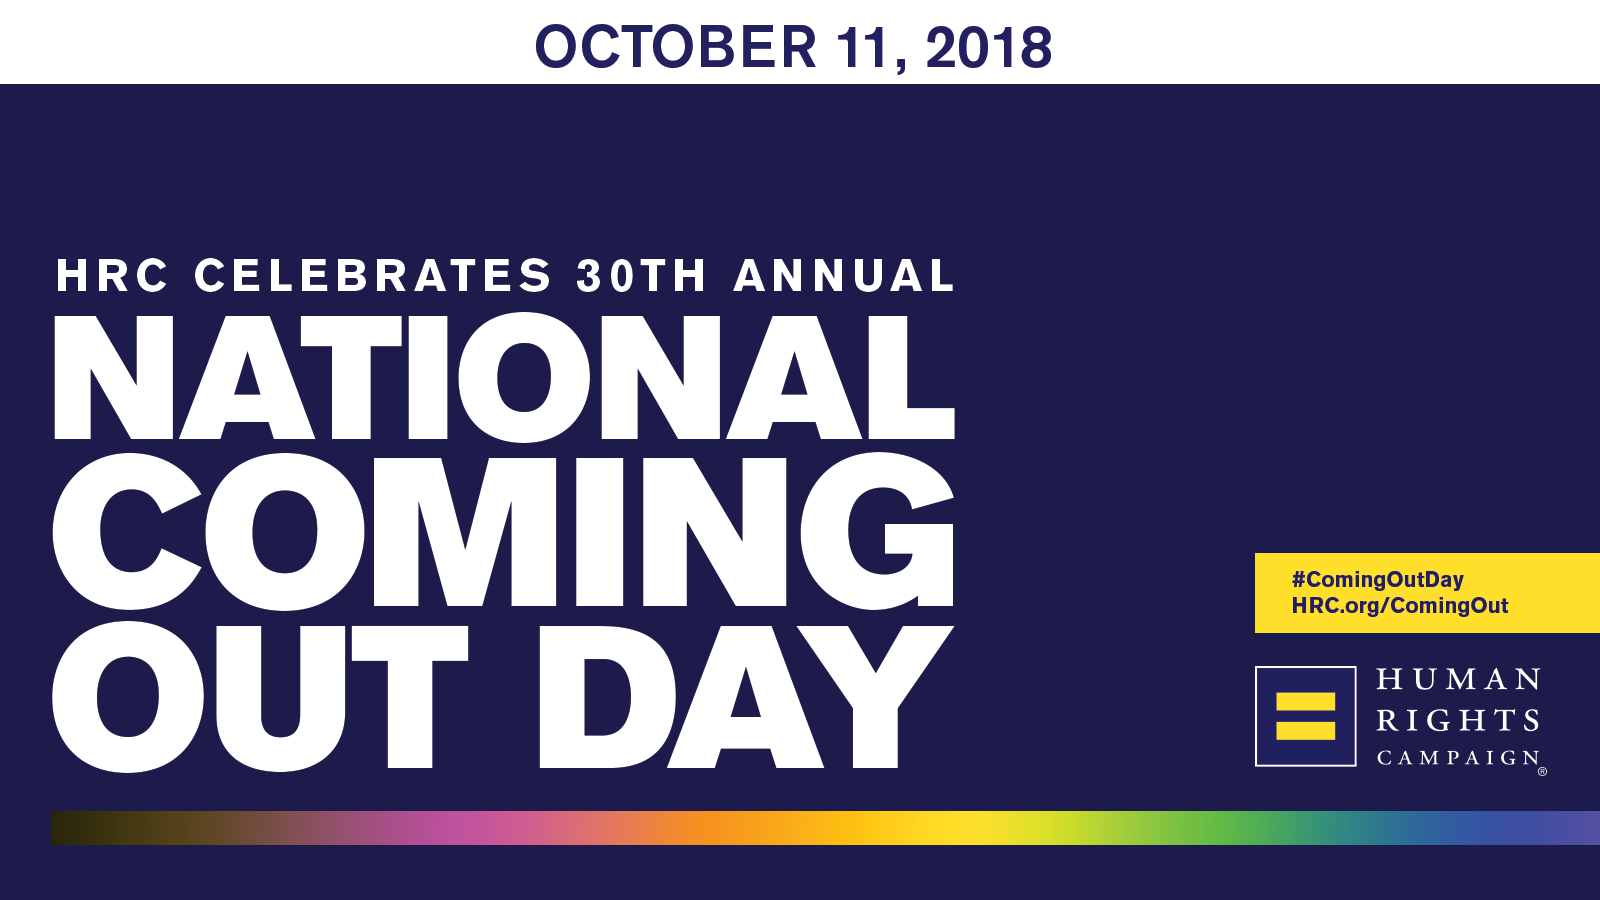 Hrc Celebrates 30th Annual National Ing Out Day Human Rights